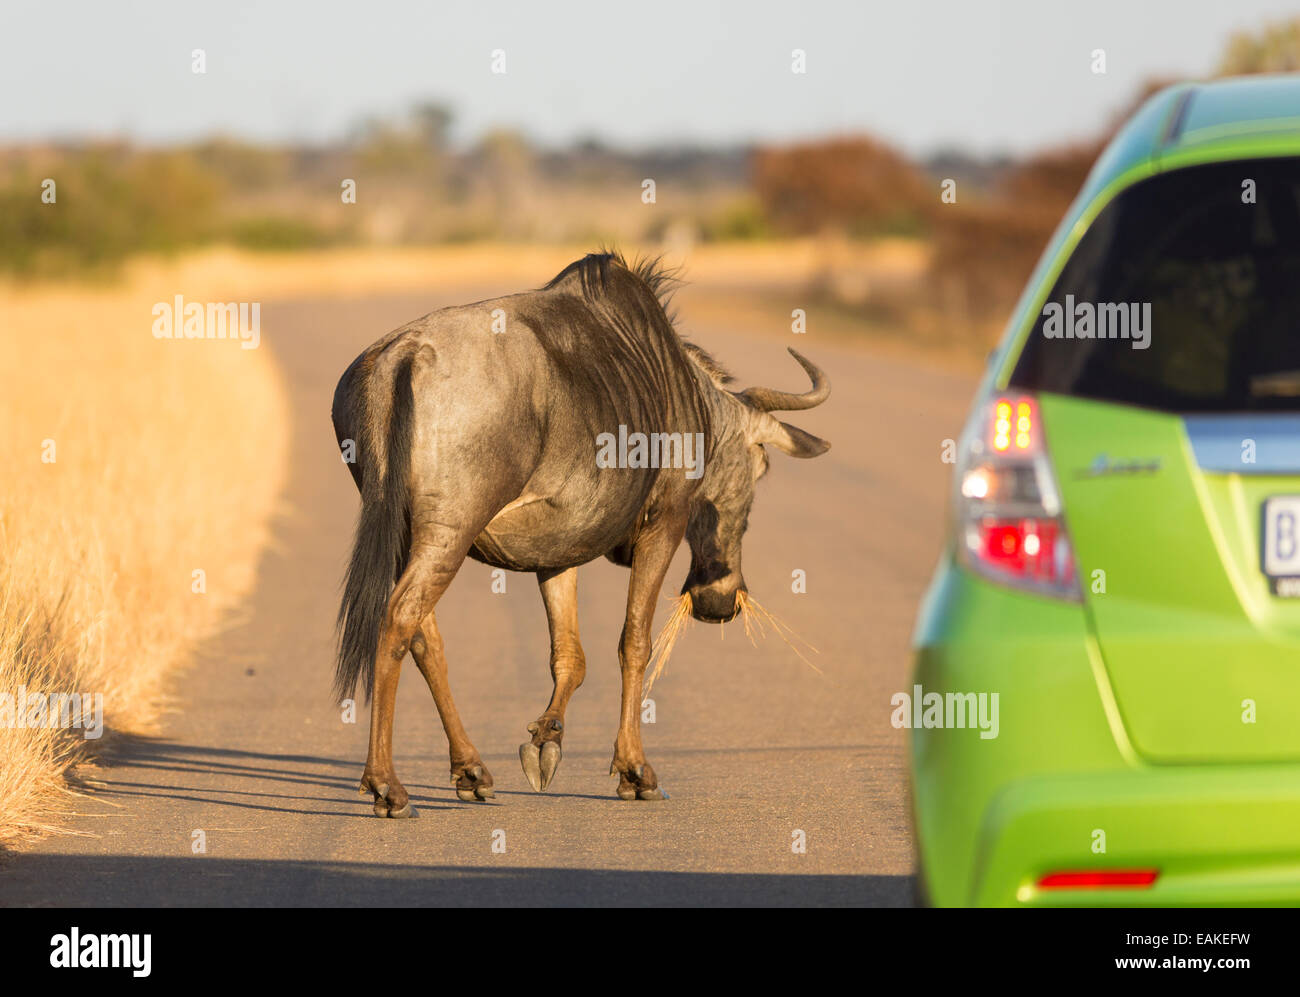 KRUGER NATIONAL PARK, SOUTH AFRICA - Blue Wildebeest crossing road in front of car Stock Photo